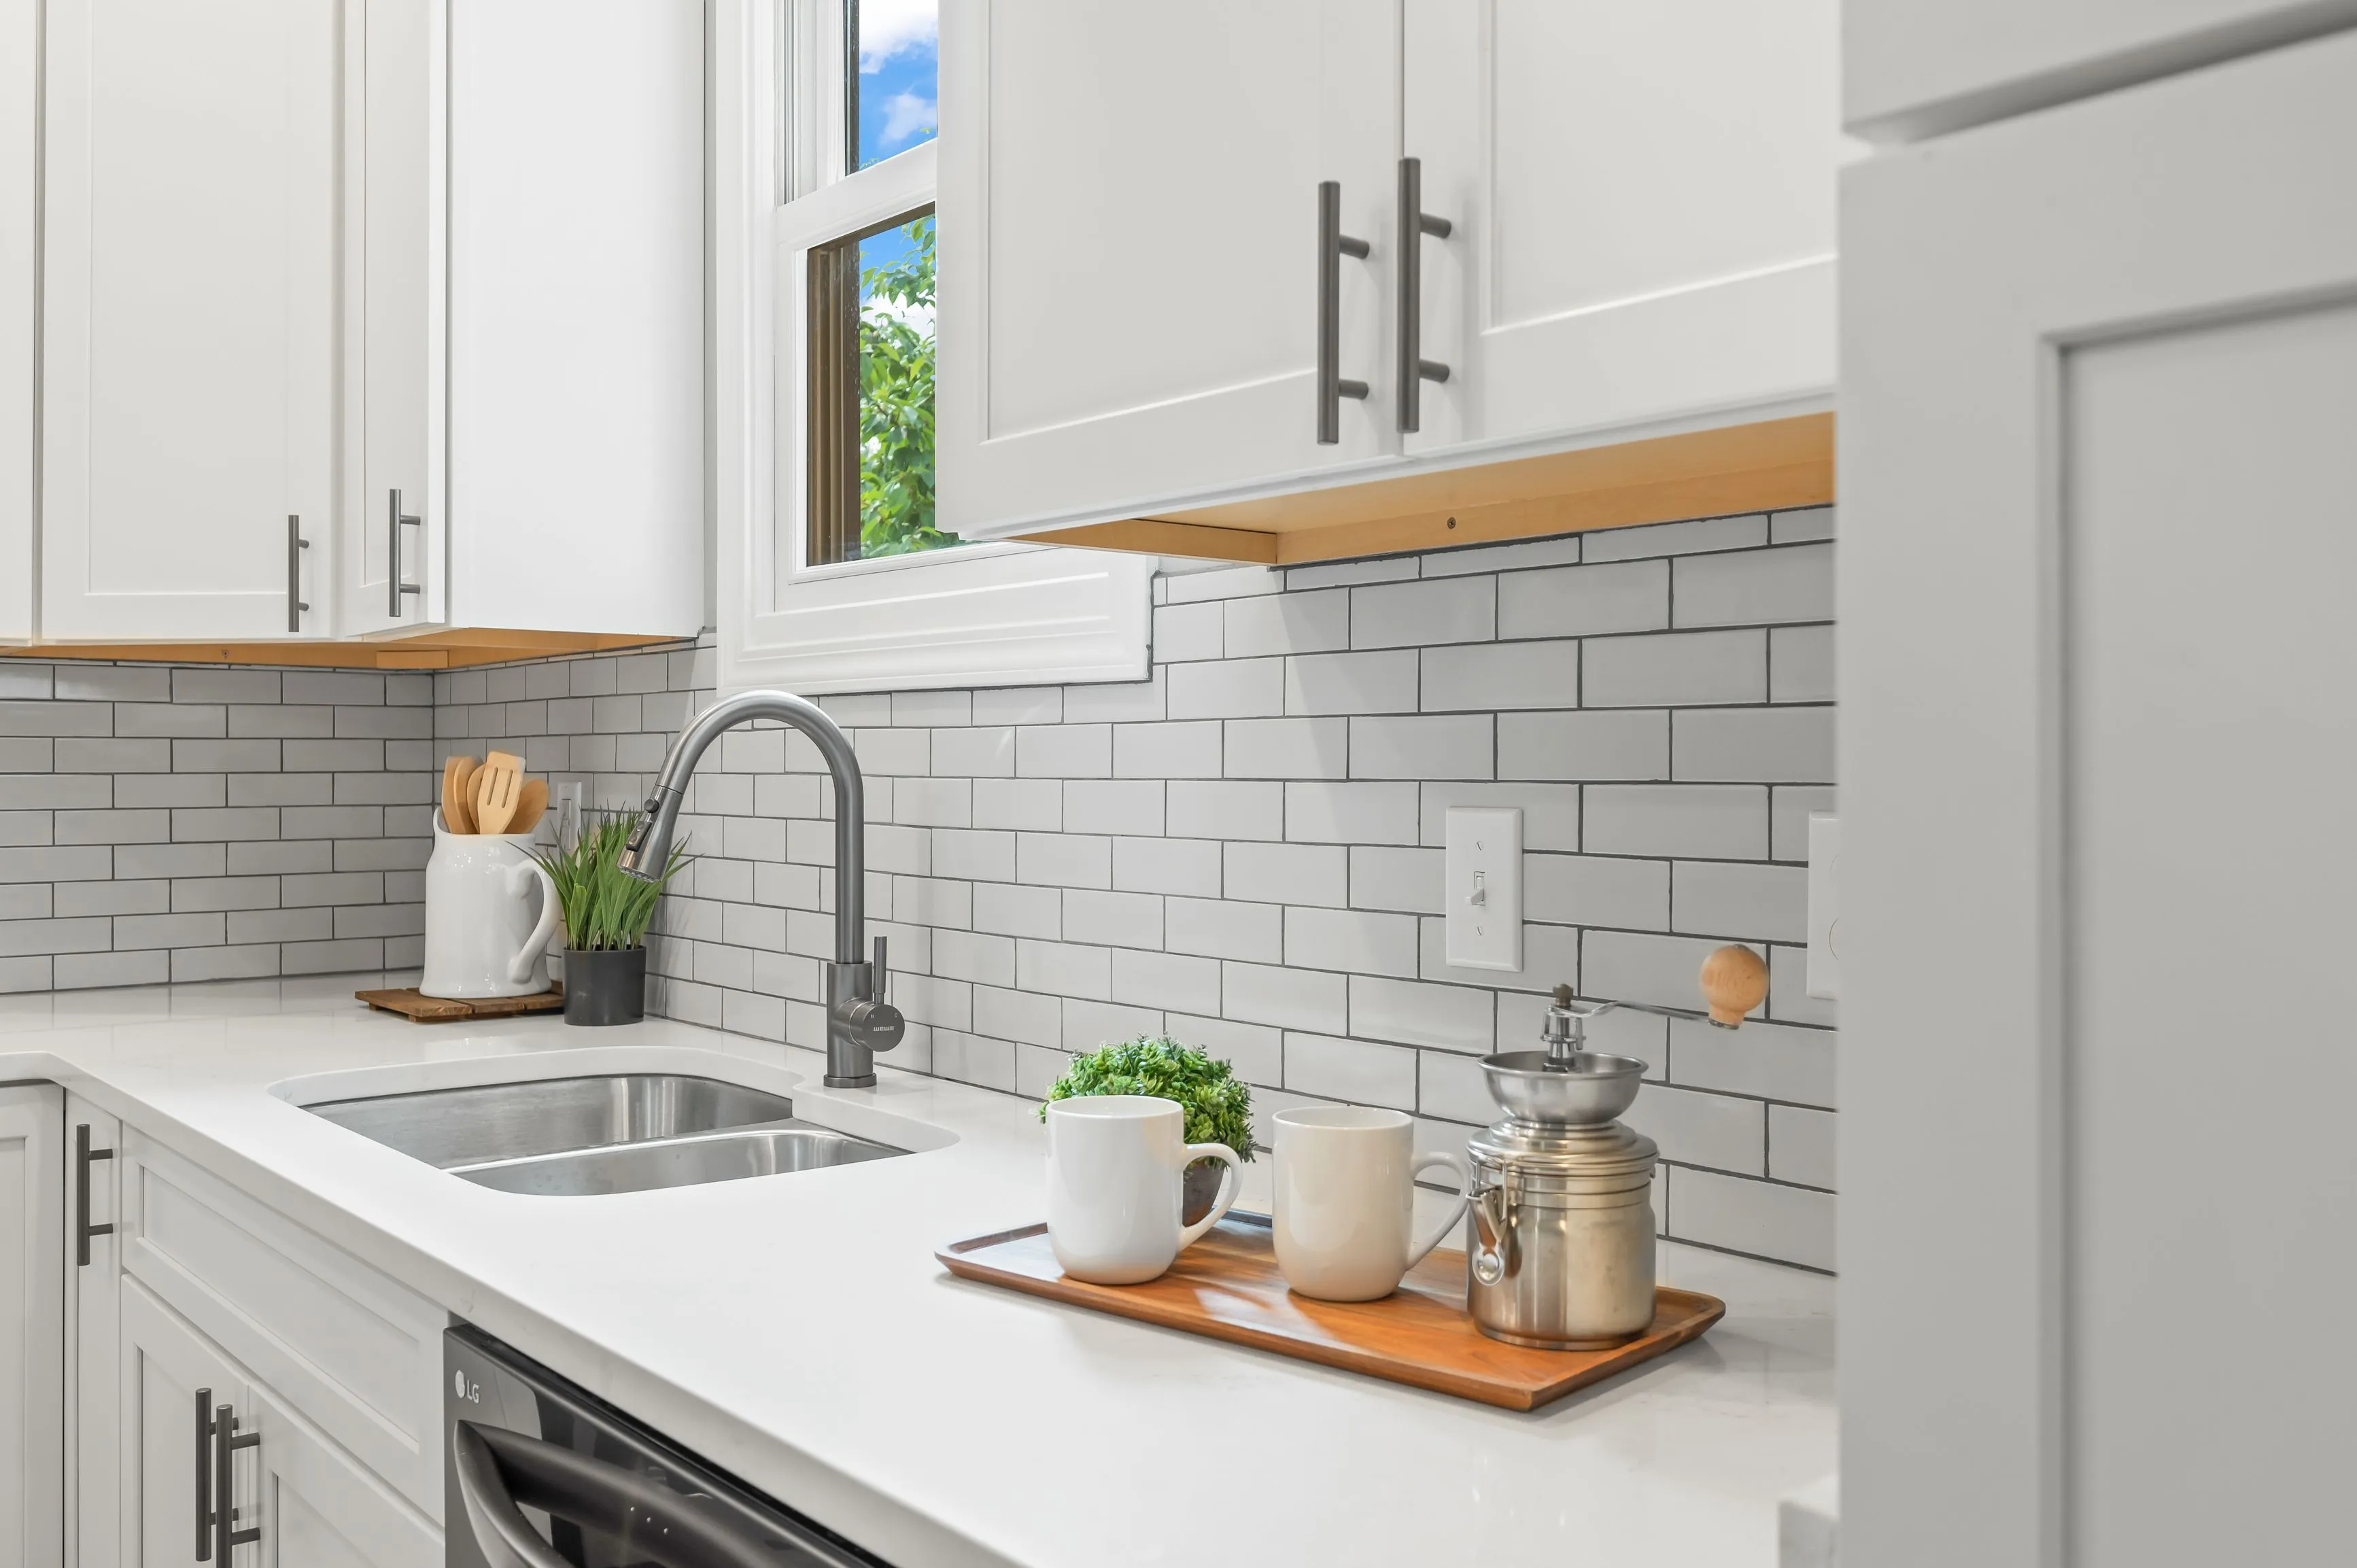 Bright modern kitchen with white cabinets, subway tile backsplash, and stainless steel sink under a window with greenery outside.